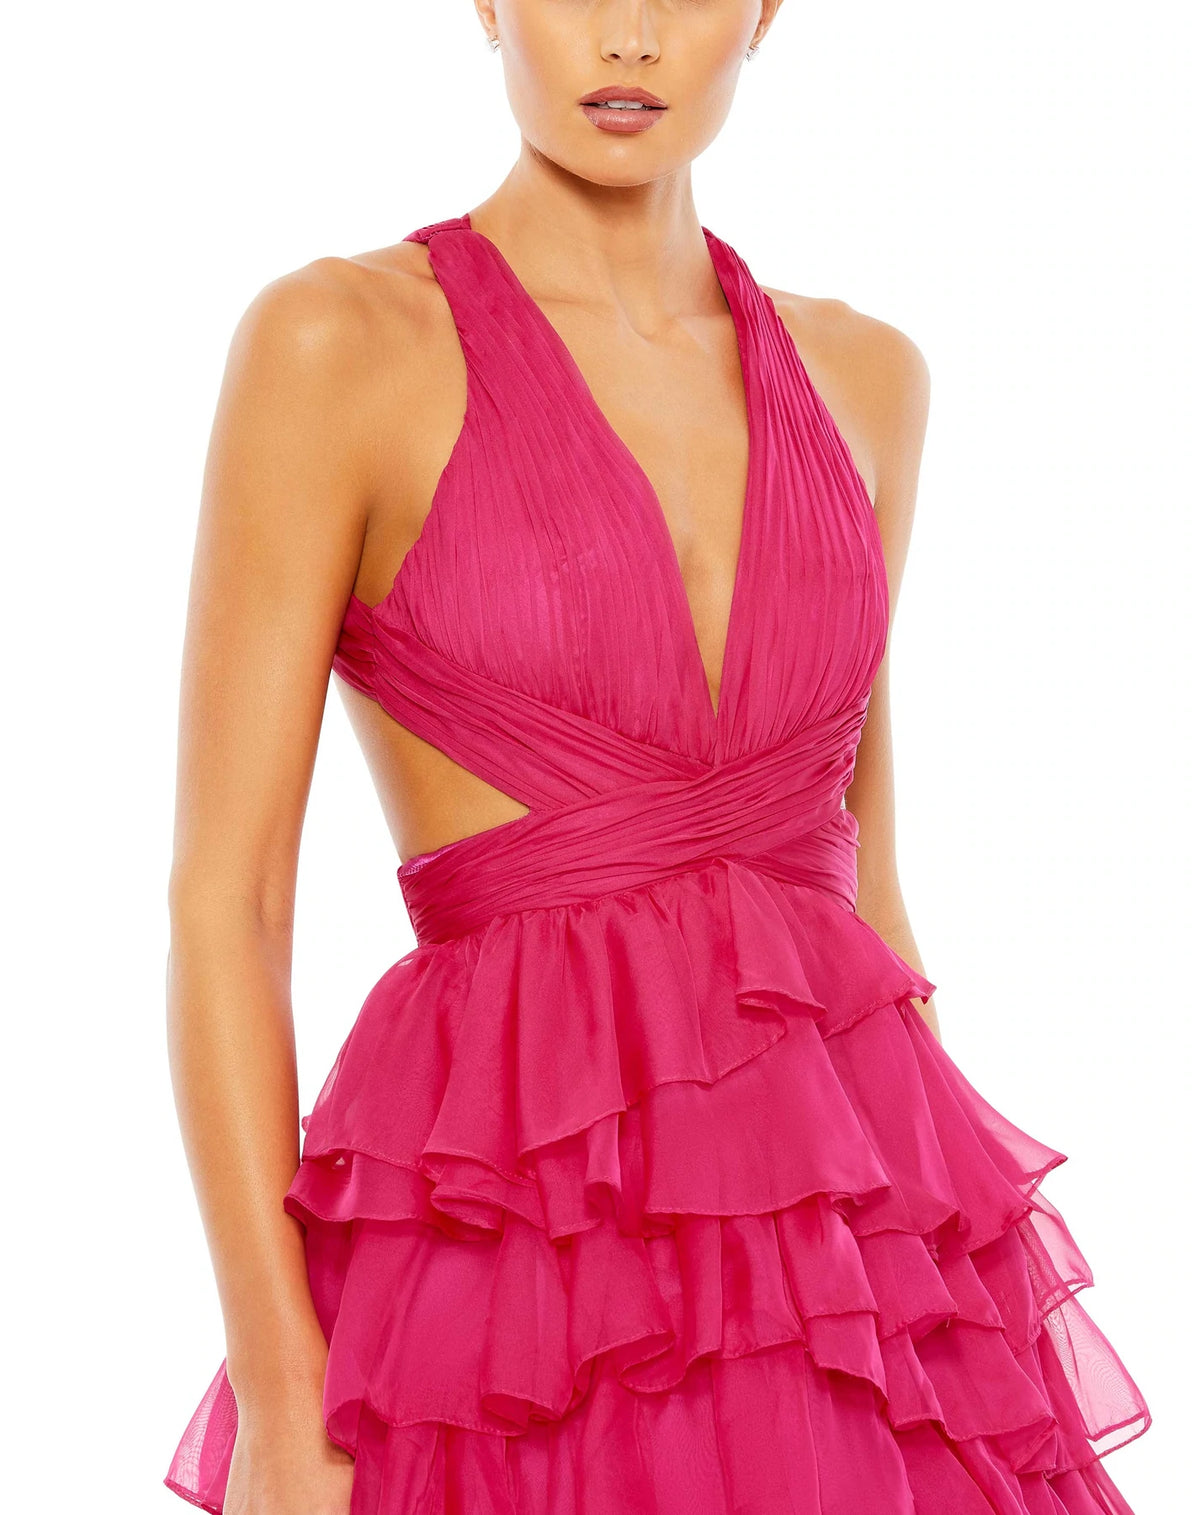 This show-stopping, hot pink fuchsia, prom dress is styled with a pleated bodice with a deep neckline, waist cutouts, and crisscross center providing the perfect amount of cleavage. With decadent layers of graduated ruffles fill out the full skirt for a design that’s festive and flirty, perfect for Summer weddings and parties close up